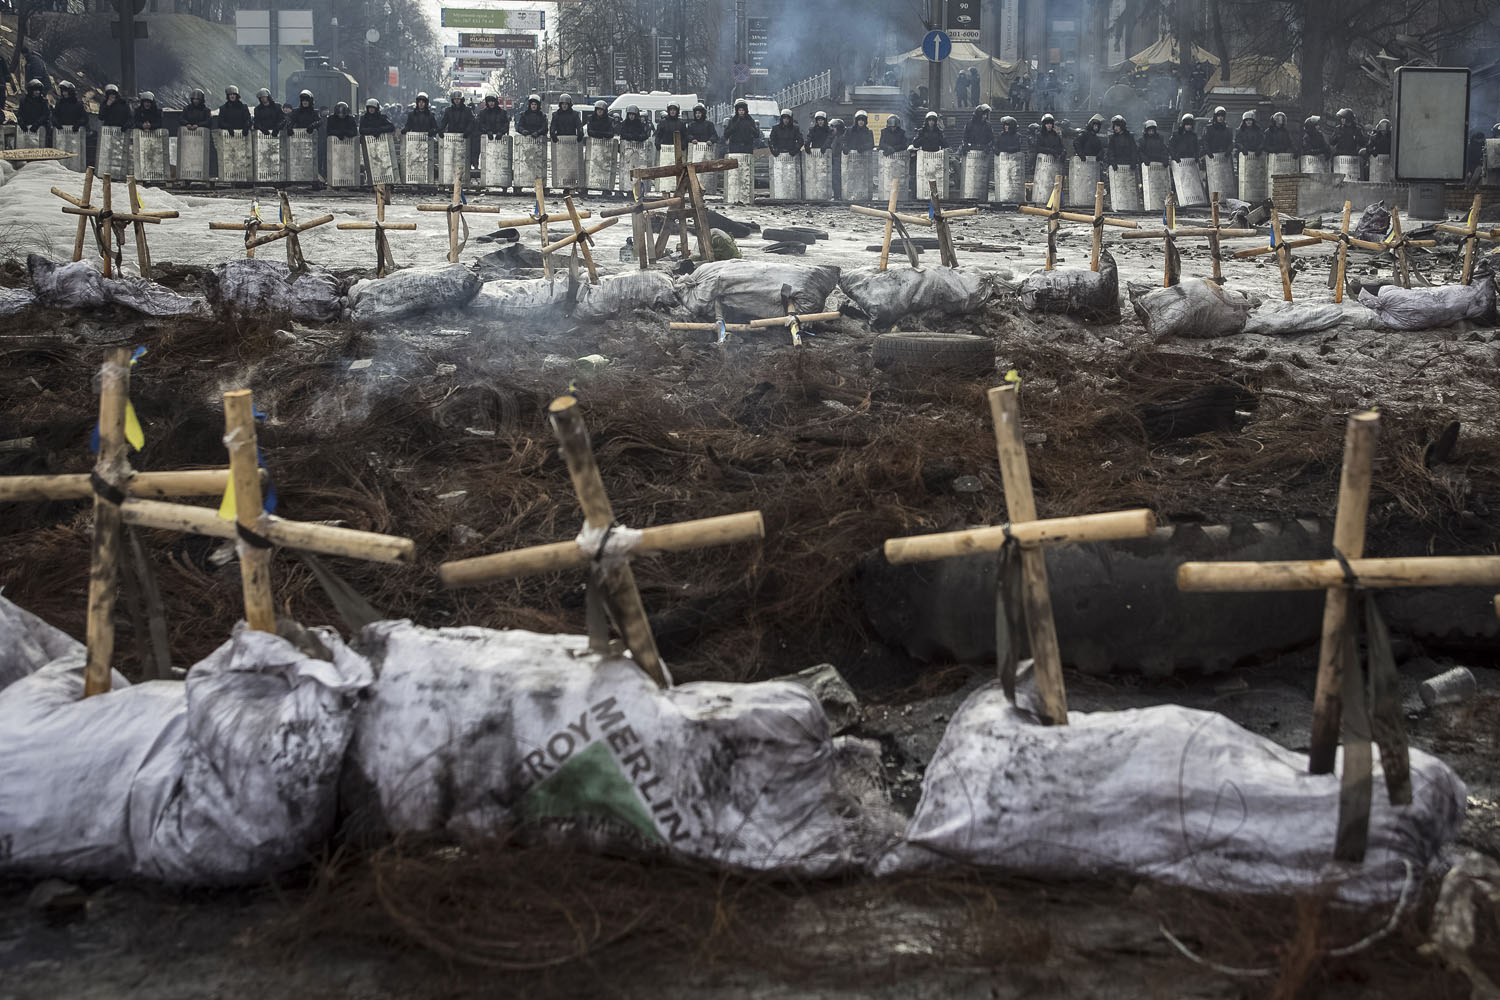 Riot police stand behind crosses installed by anti-government protesters in memory of the people who have died and went missing during clashes in Ukraine, near the barricades in Kiev